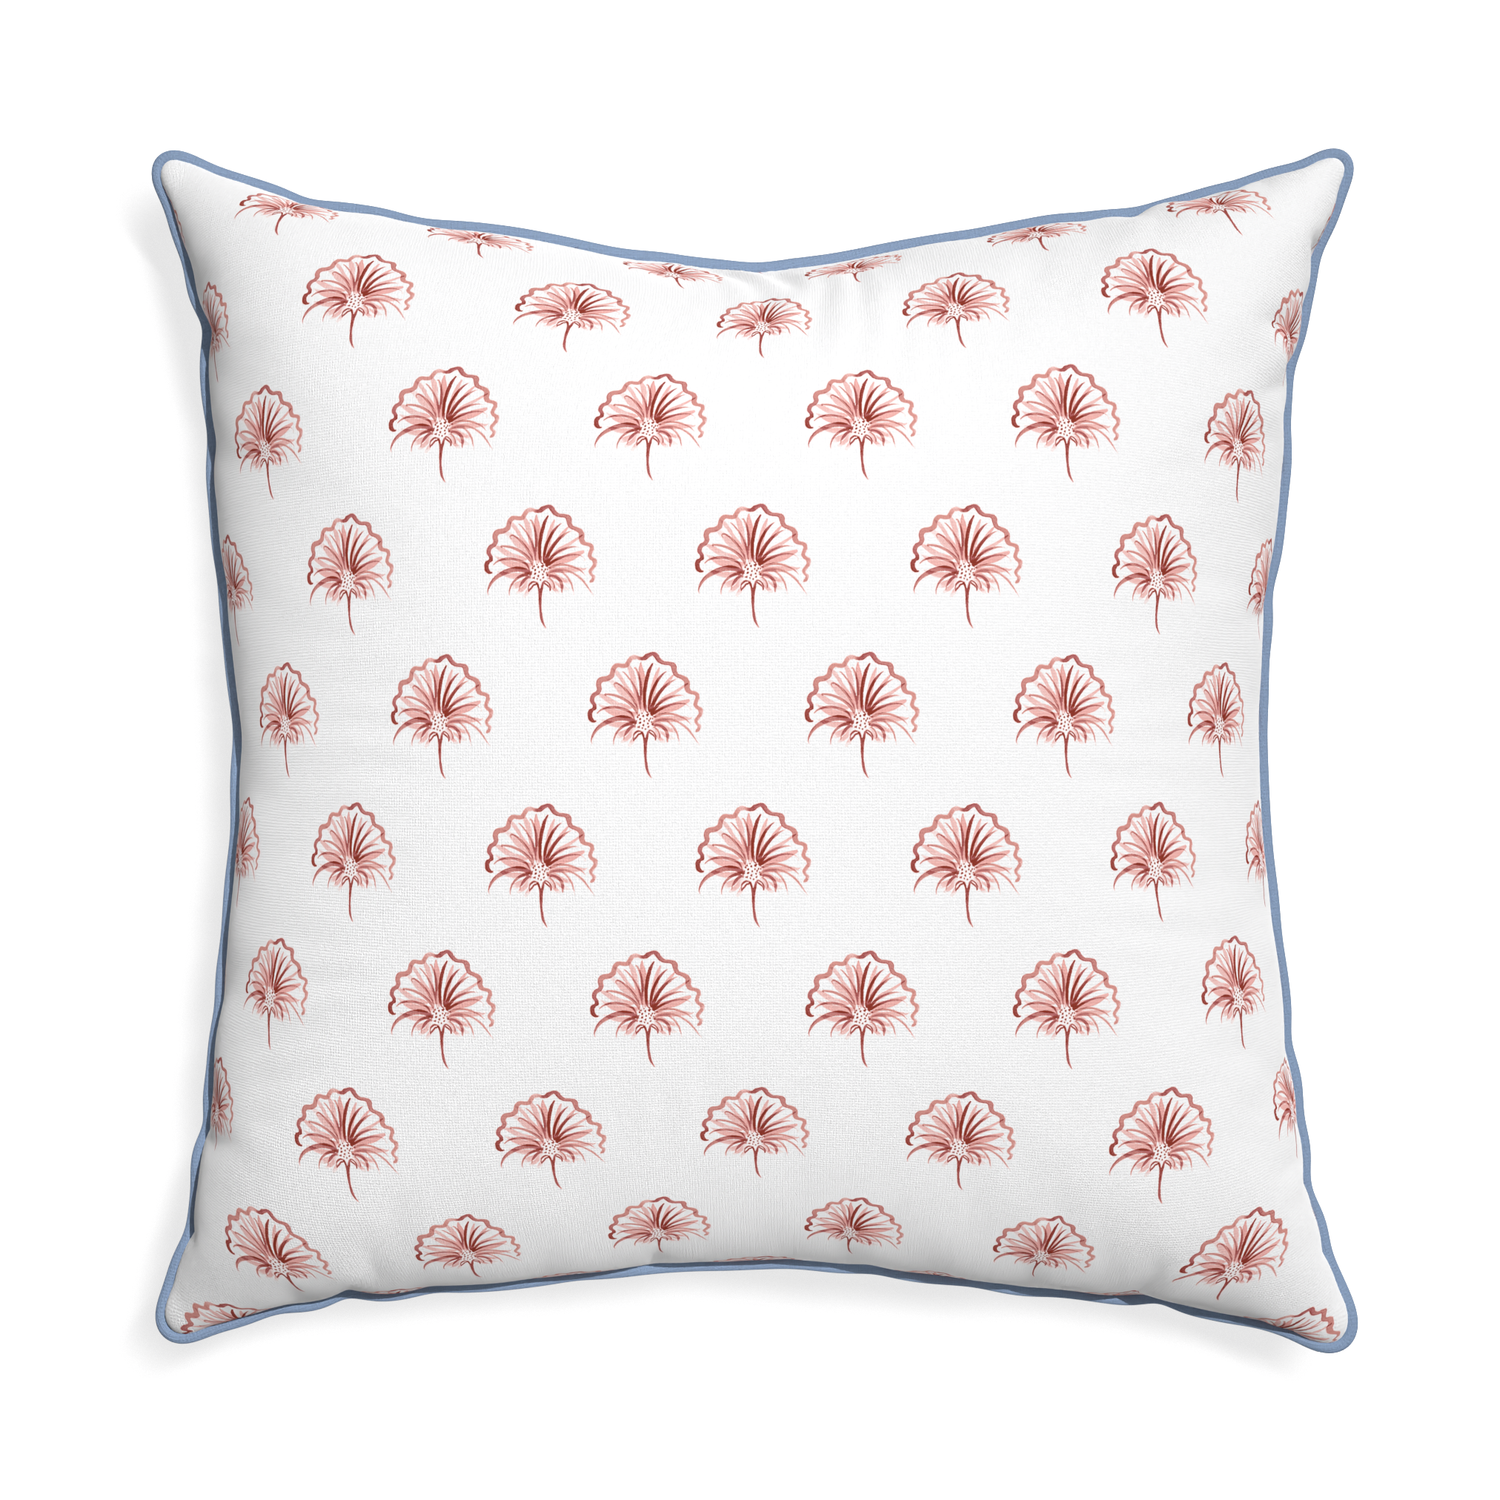 Euro-sham penelope rose custom floral pinkpillow with sky piping on white background